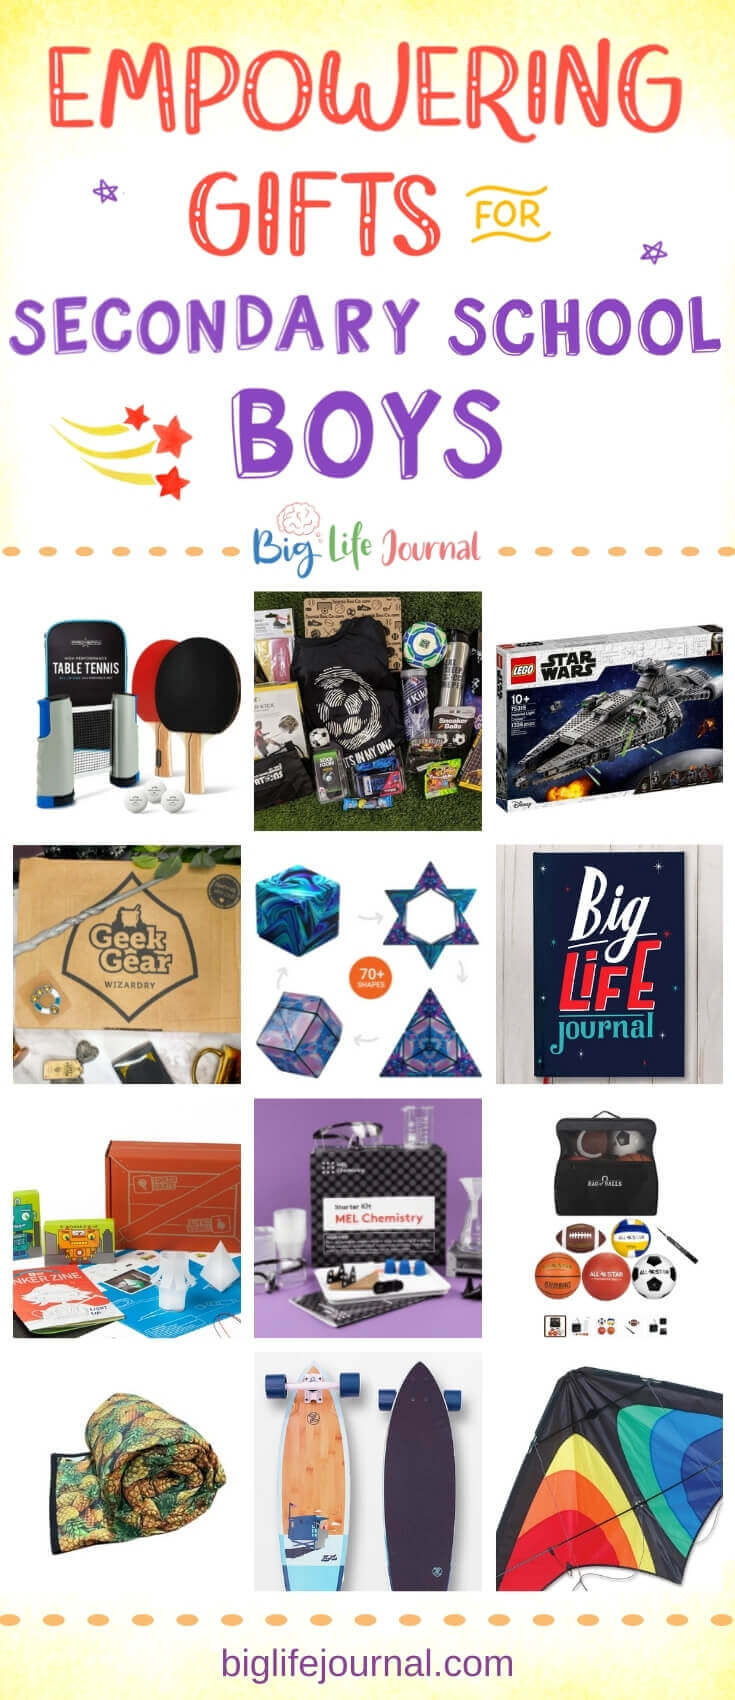 15 Gifts for Secondary School Boys